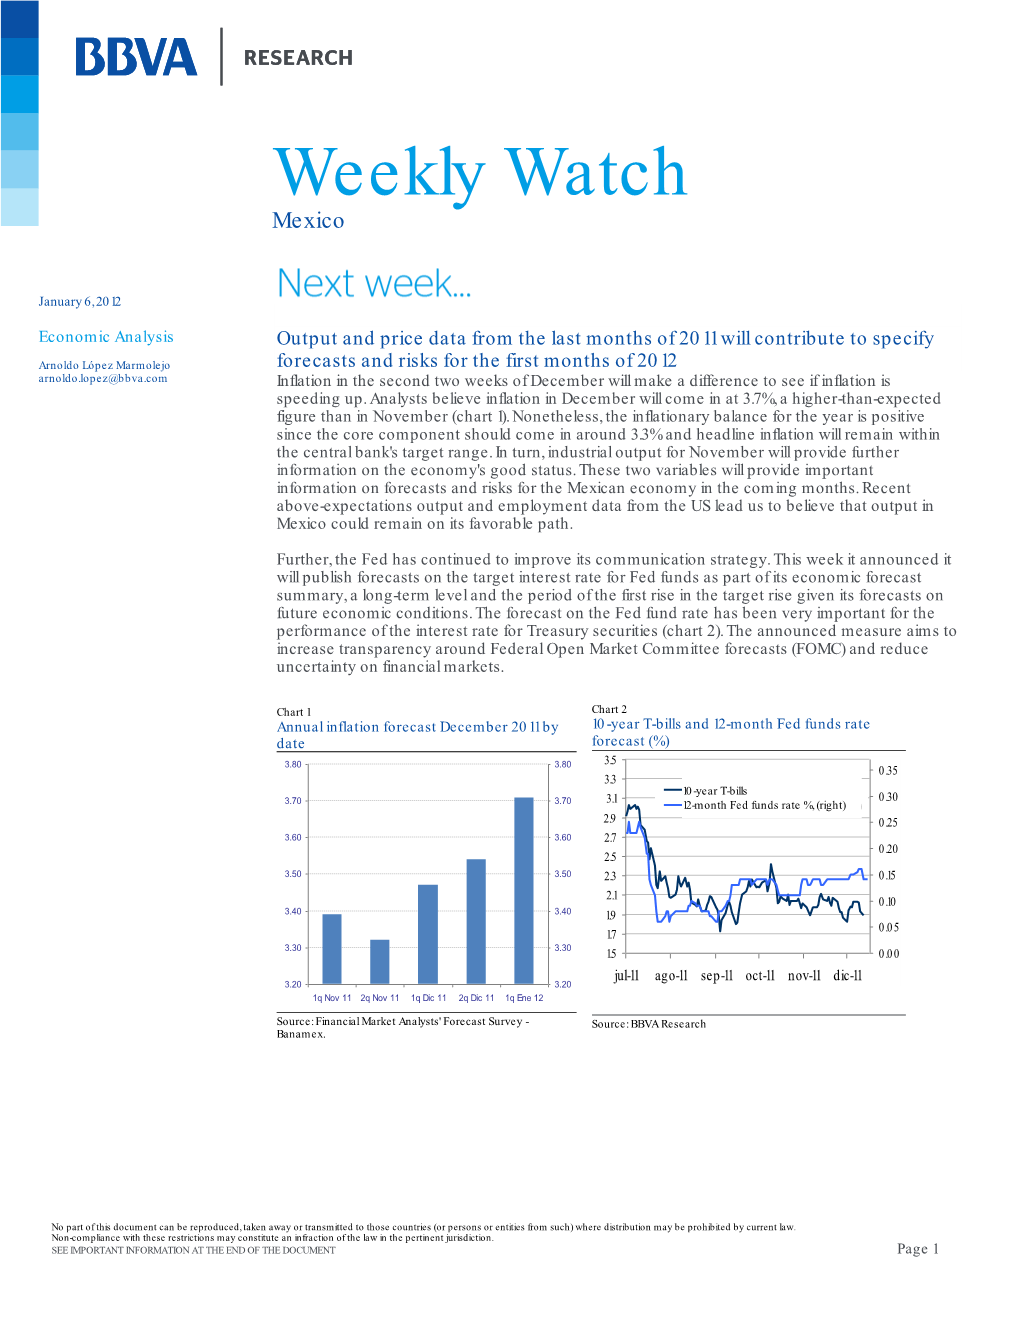 Mexico Weekly Watch January 6, 2012